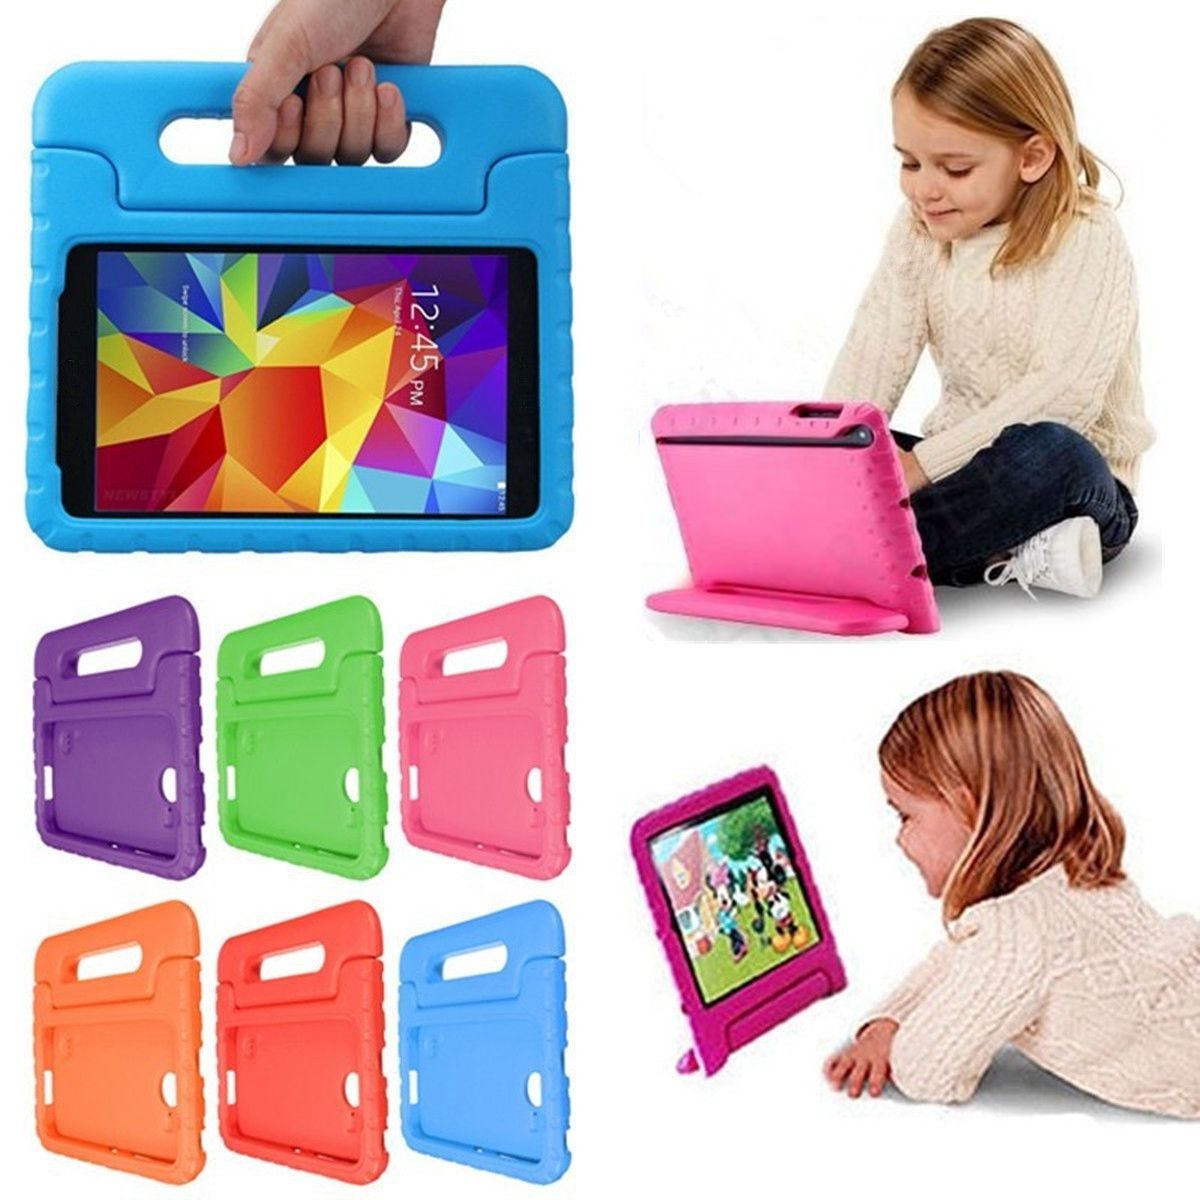 EVA-Tablet-Case-Foam-Cover-Stand-Portable-Protective-Case-for-Tablet--4---101-1736699